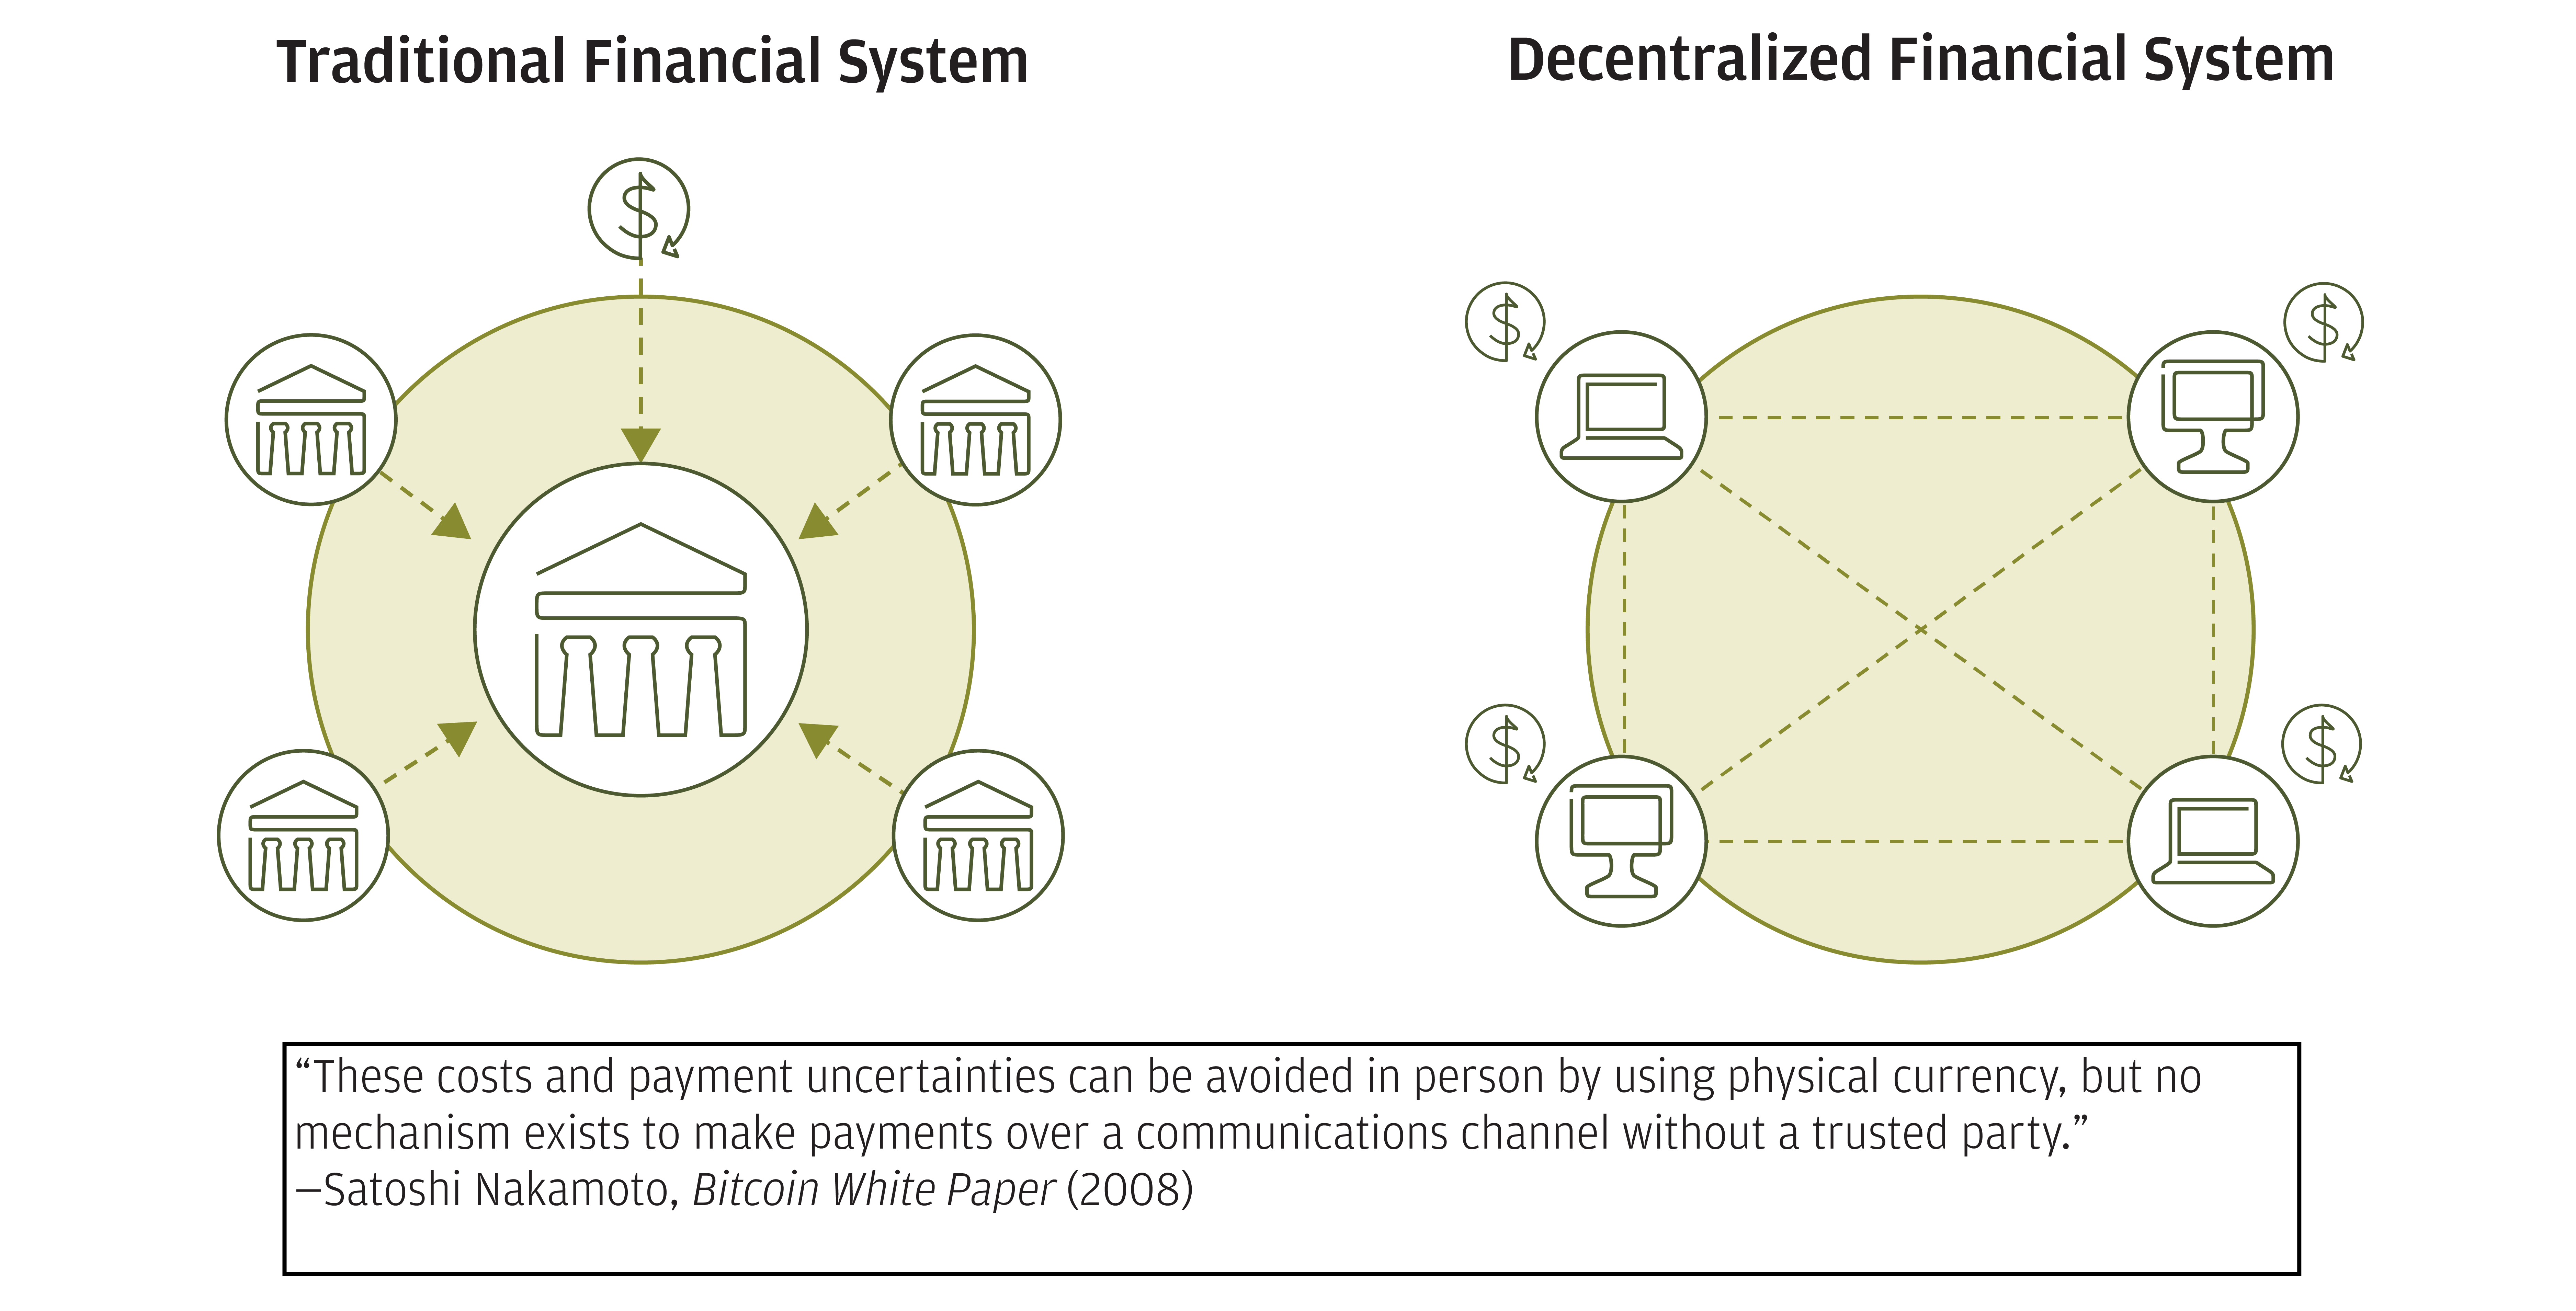 This image highlights the inefficiencies in the traditional financials system, with a central authority required to certify ownership and clear transactions. It sits in the middle of all transactions. A decentralized system however, eliminates the need for a central authority in the middle, allowing peers to simply transact with one another.